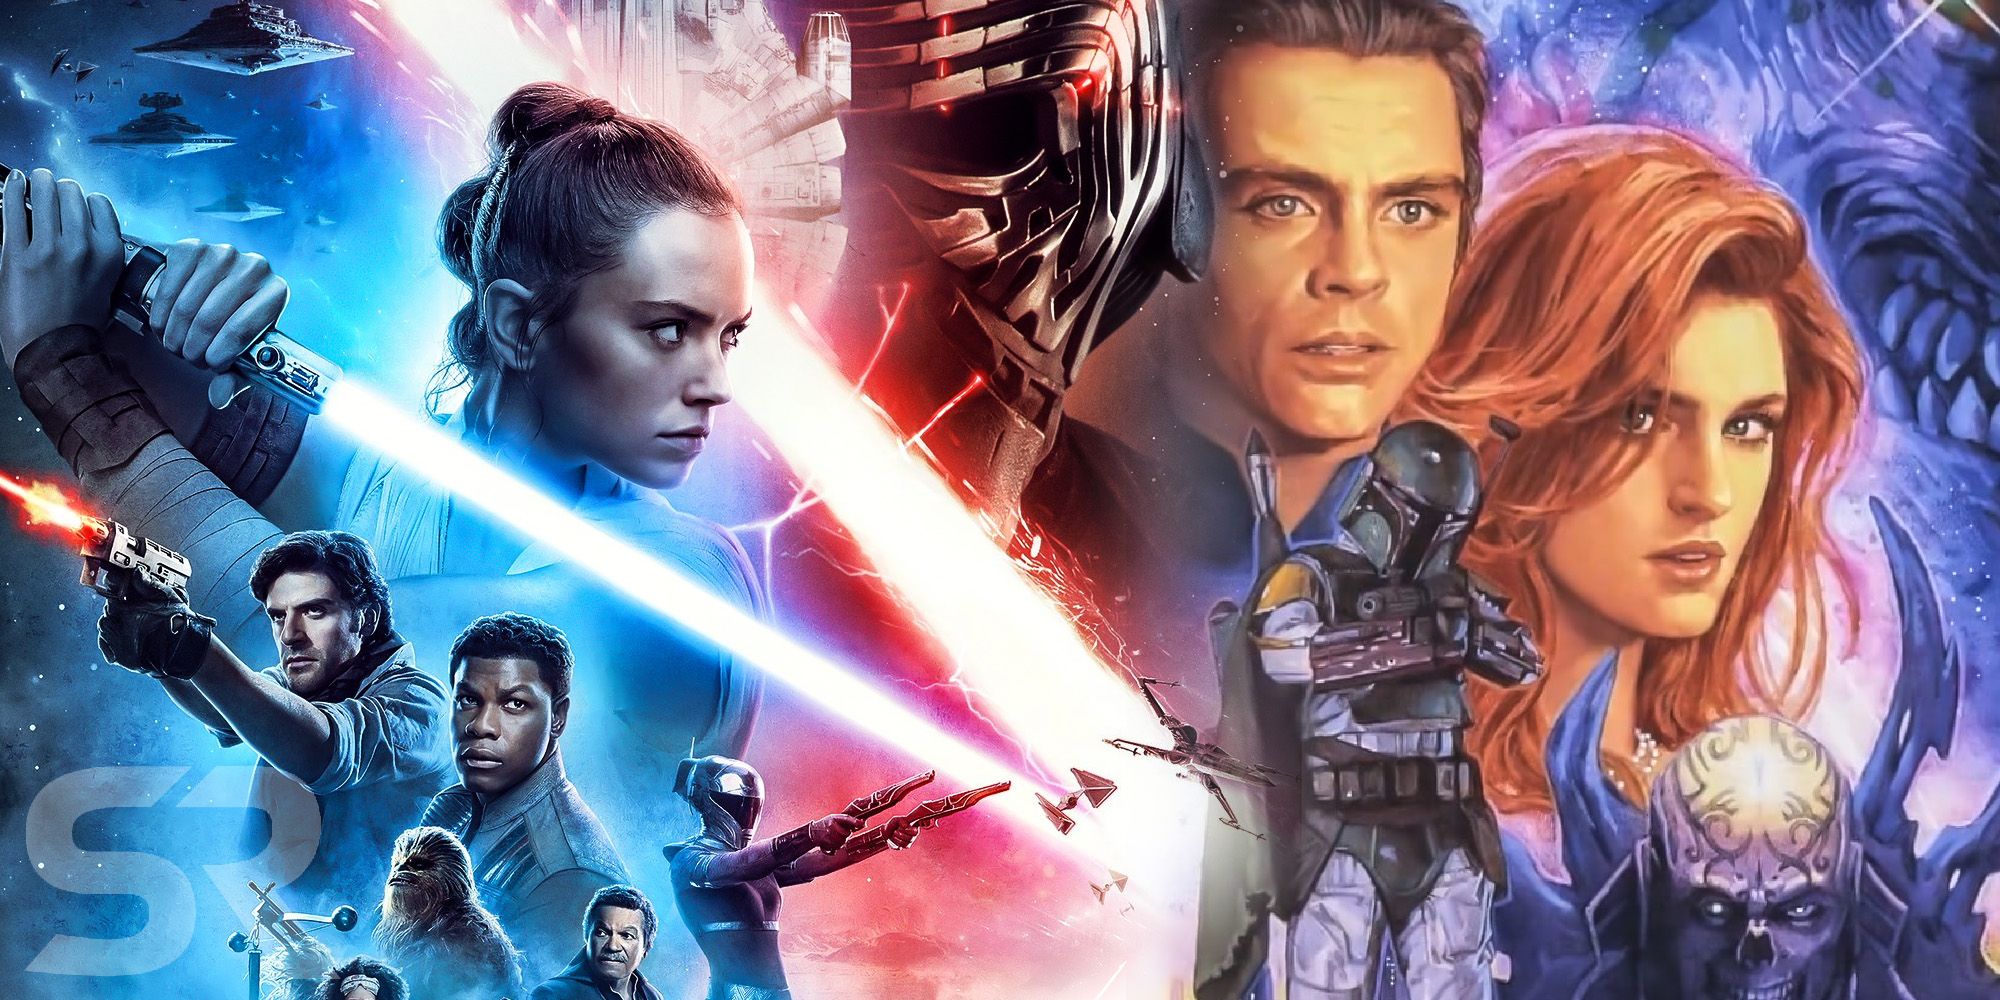 Star Wars Expanded Universe and The Rise of Skywalker poster.